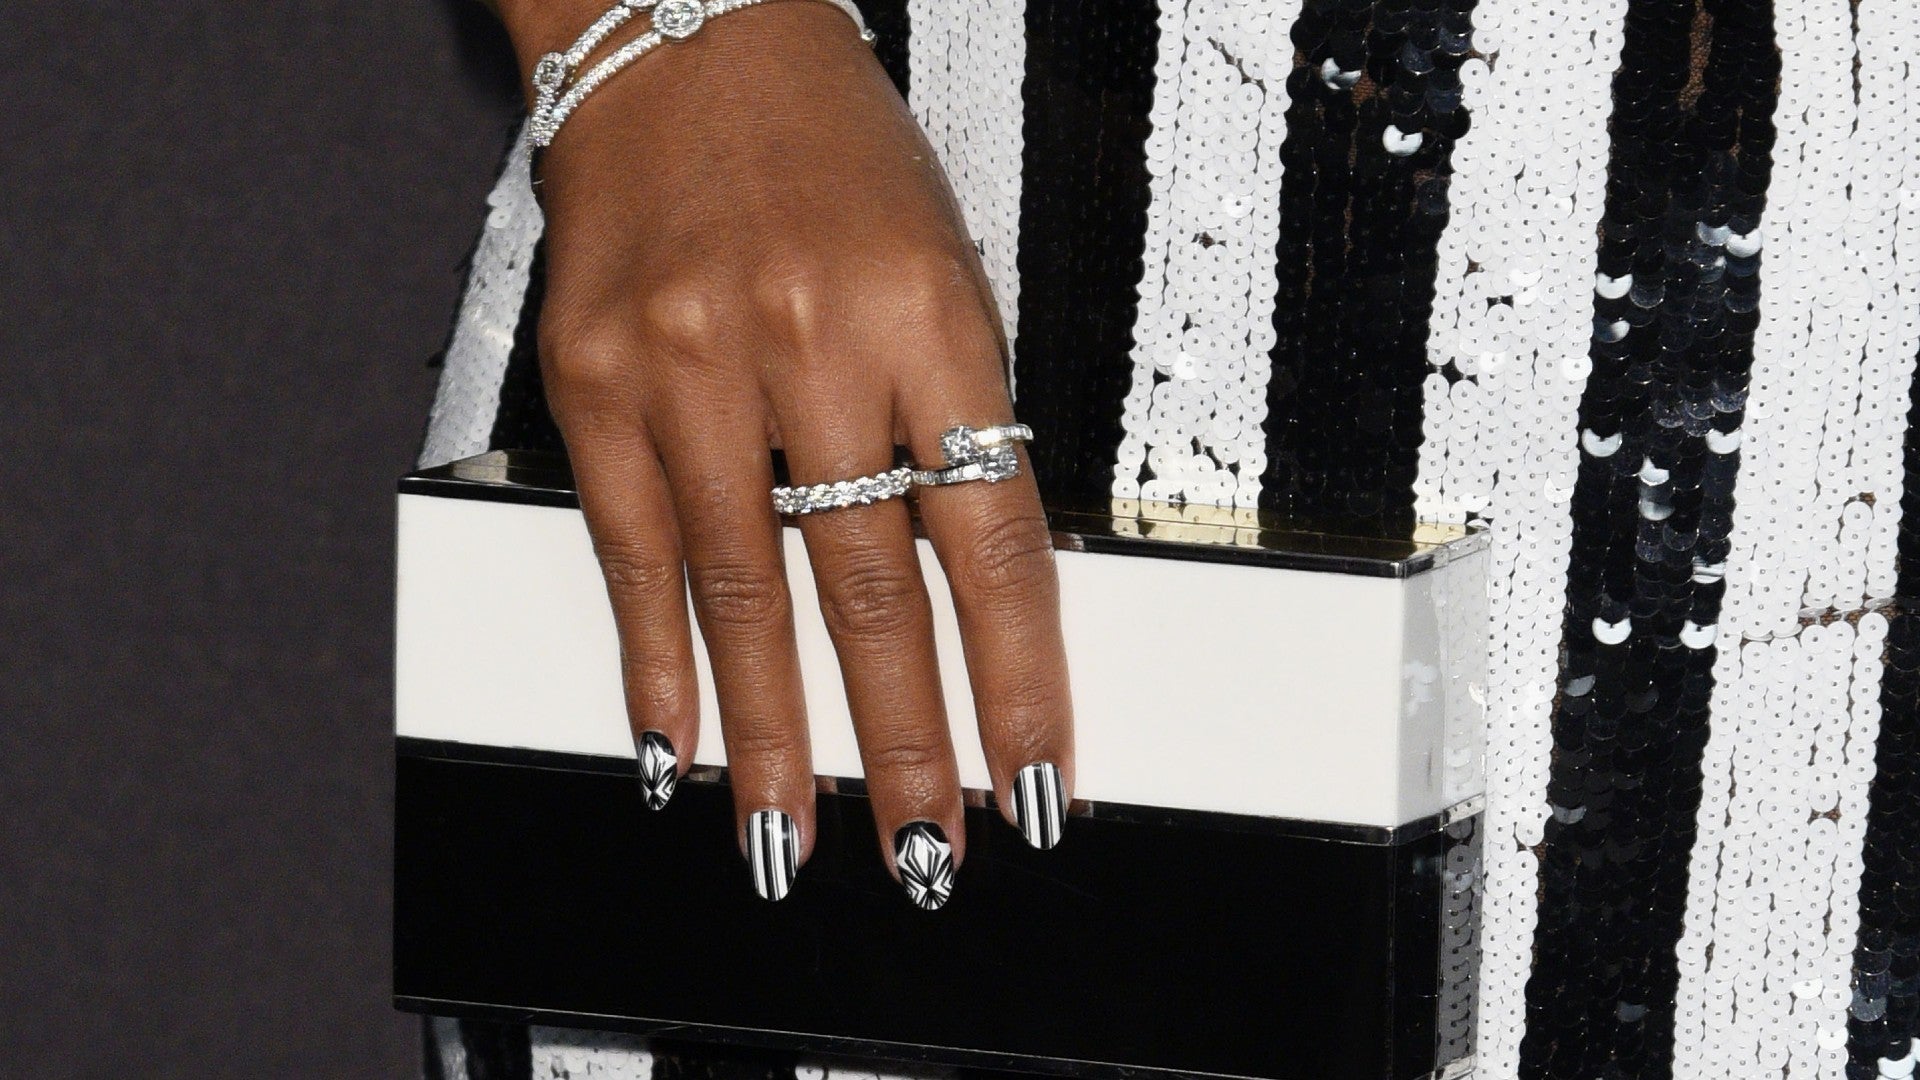 Get Into These Hot Black And White Nail Designs For Spring